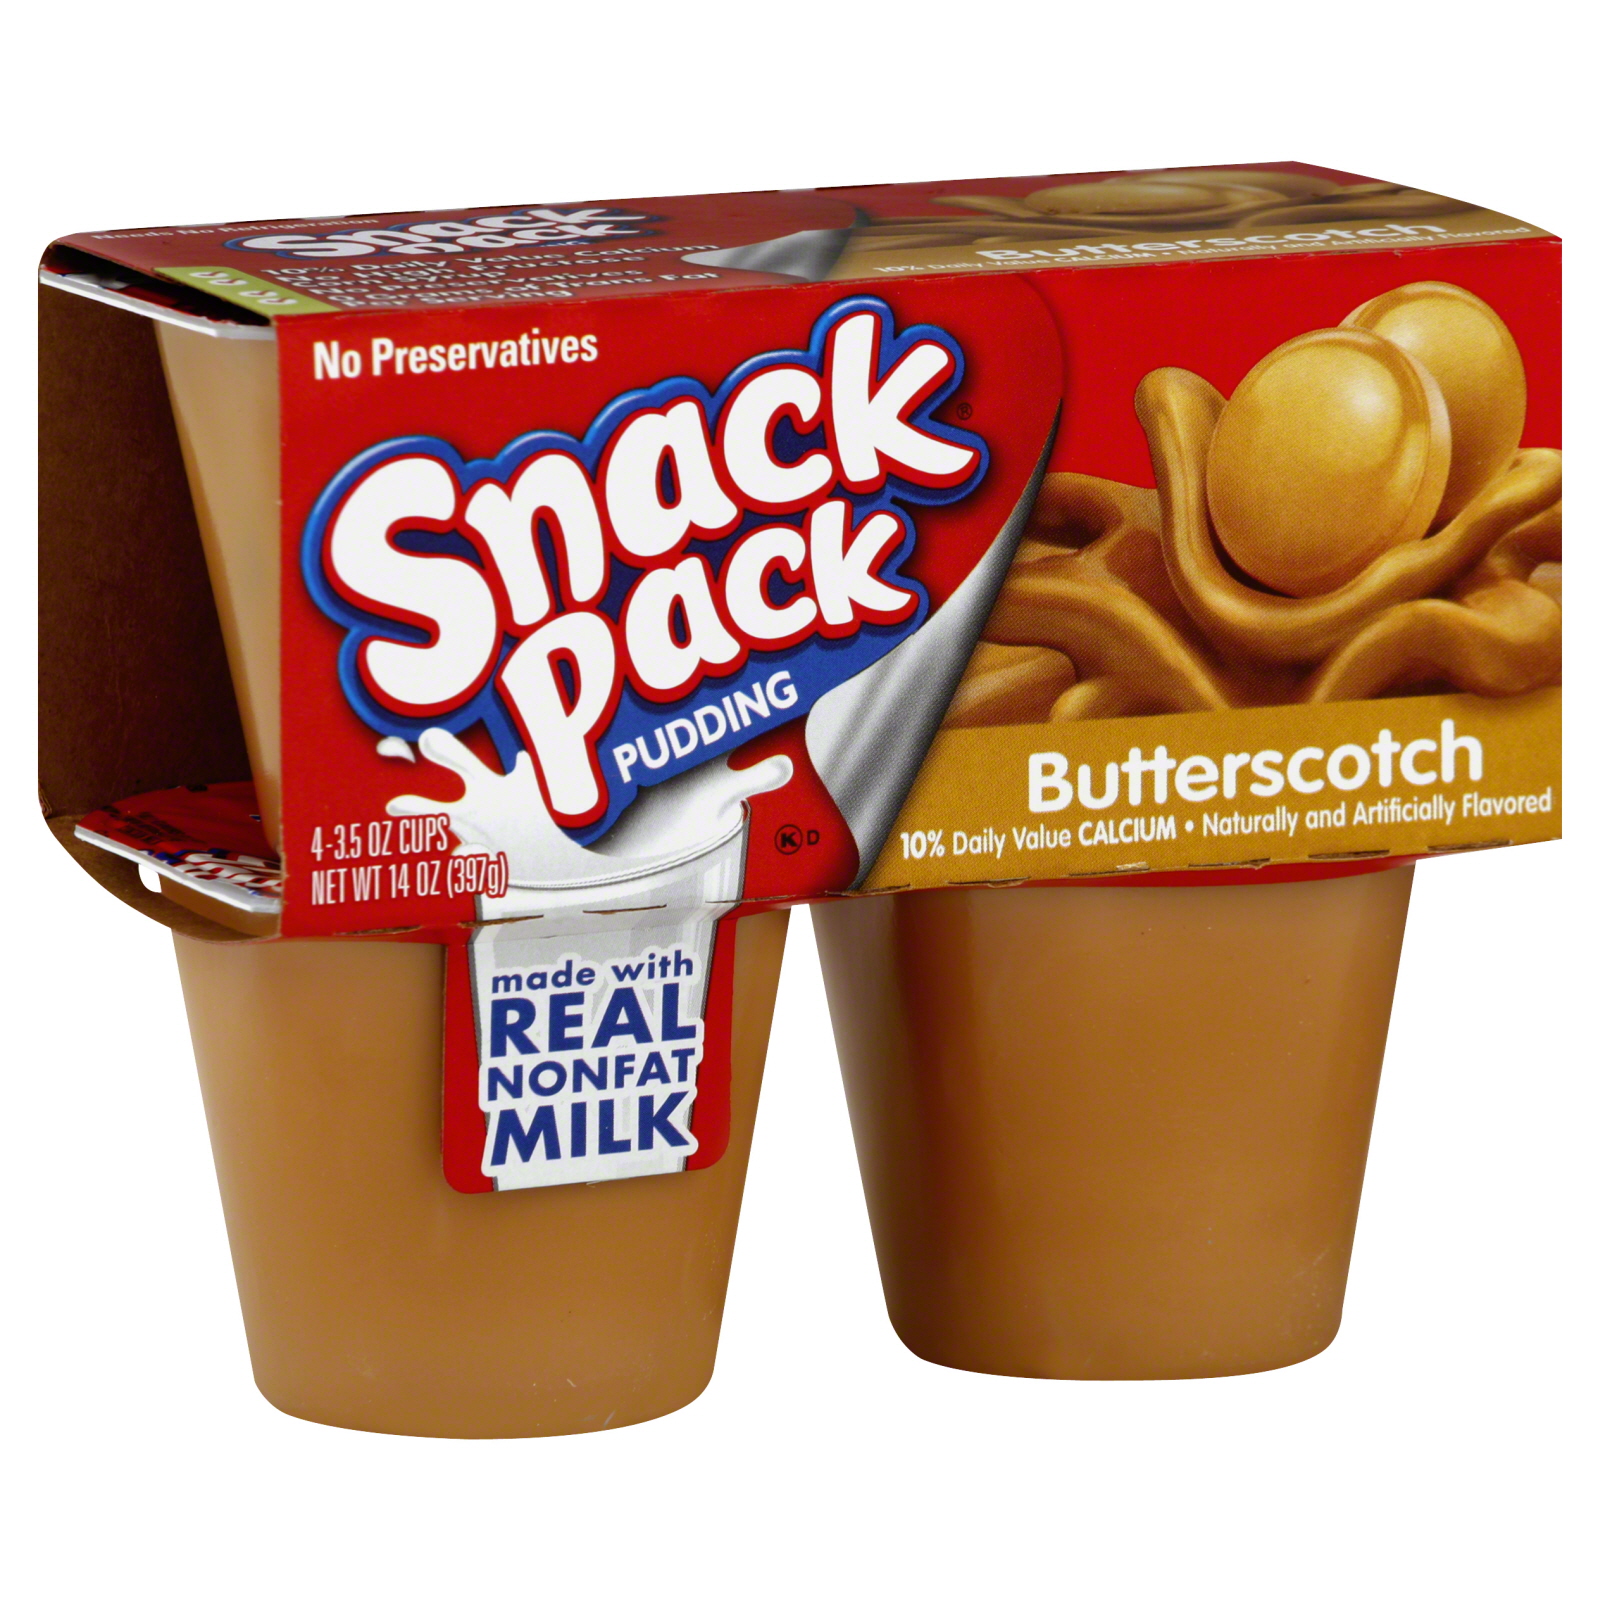 Hunt's Pudding Cups, Butterscotch, 4-3.5 cups (397 g)